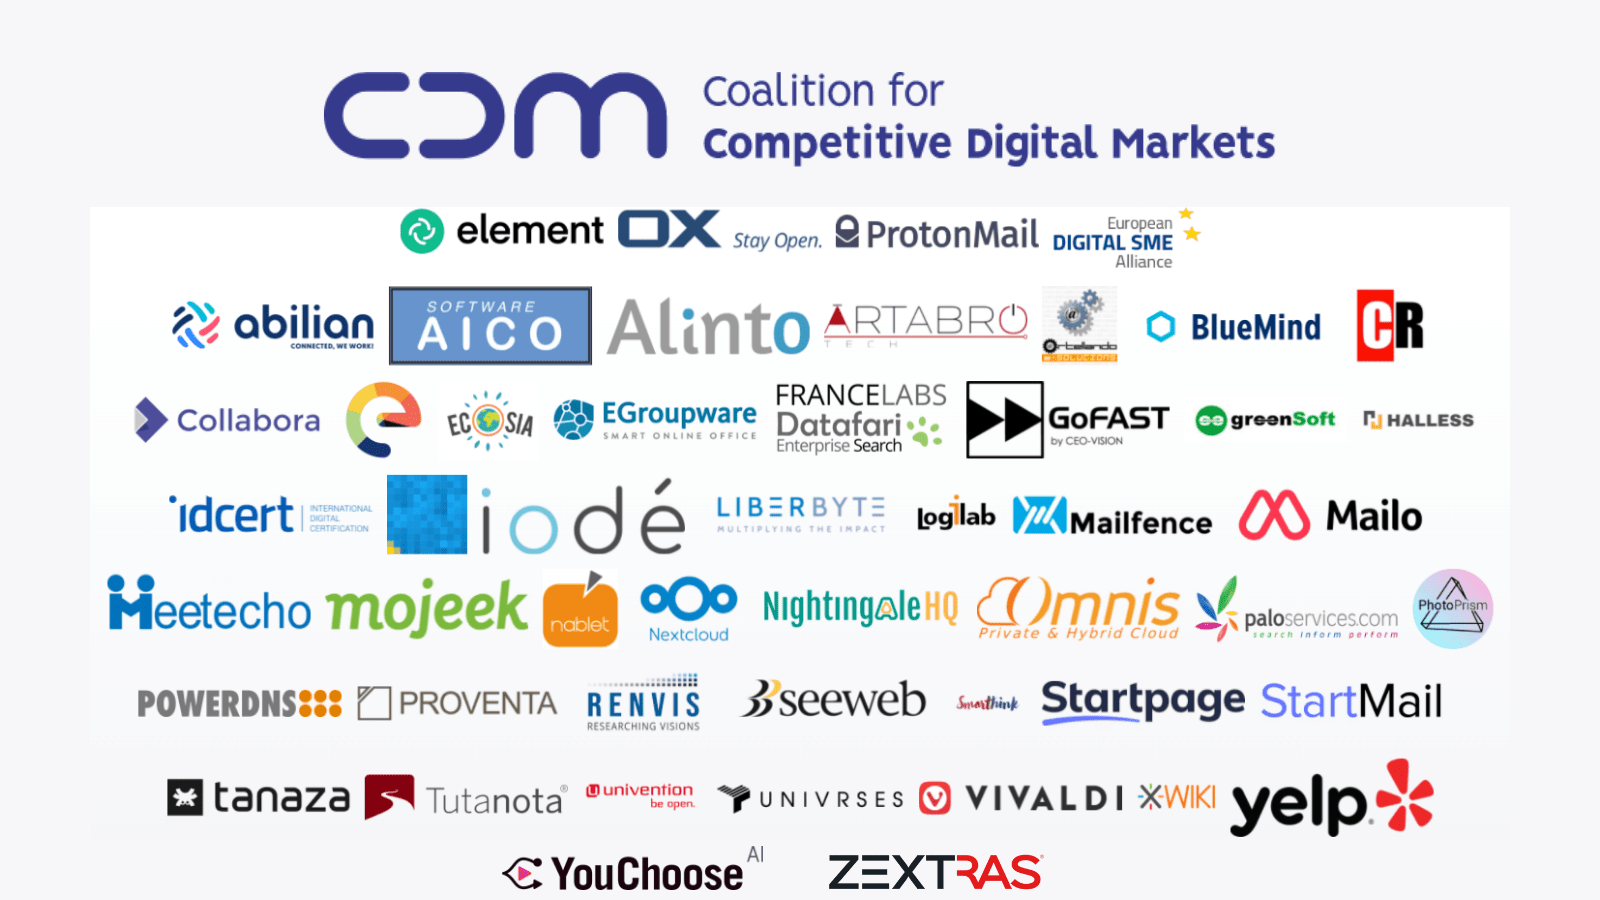 the logos of the members of the Coalition for Competitive Digital Markets